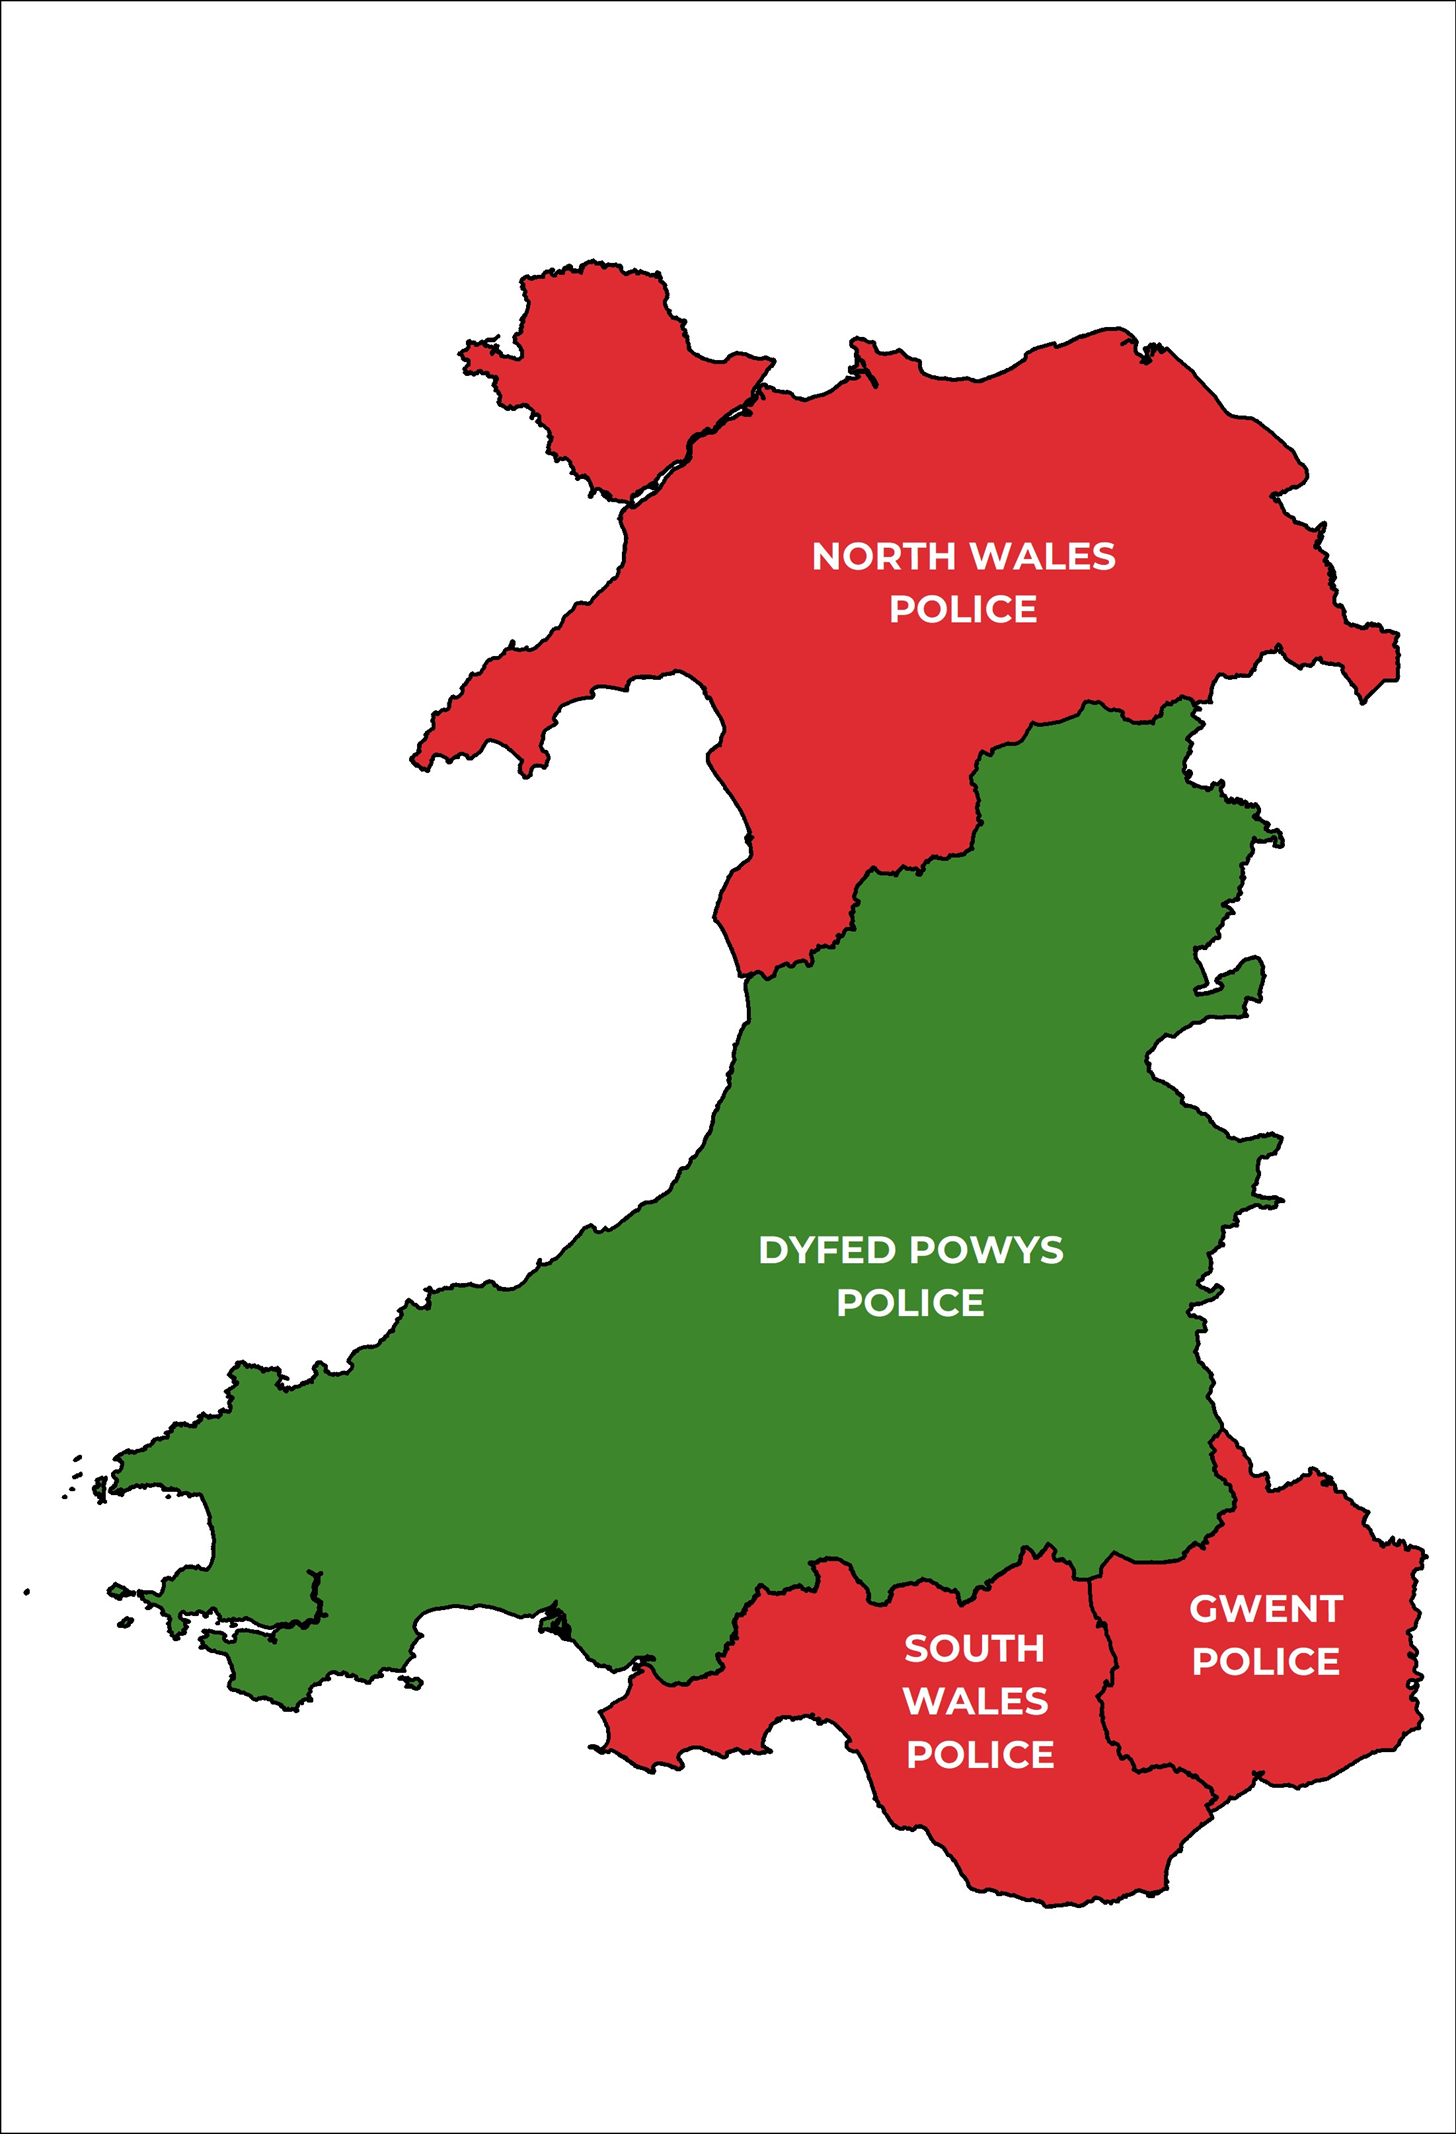 A map showing the four police areas of Wales. Dyfed Powys is coloured in green, whilst the three other areas are coloured in red.